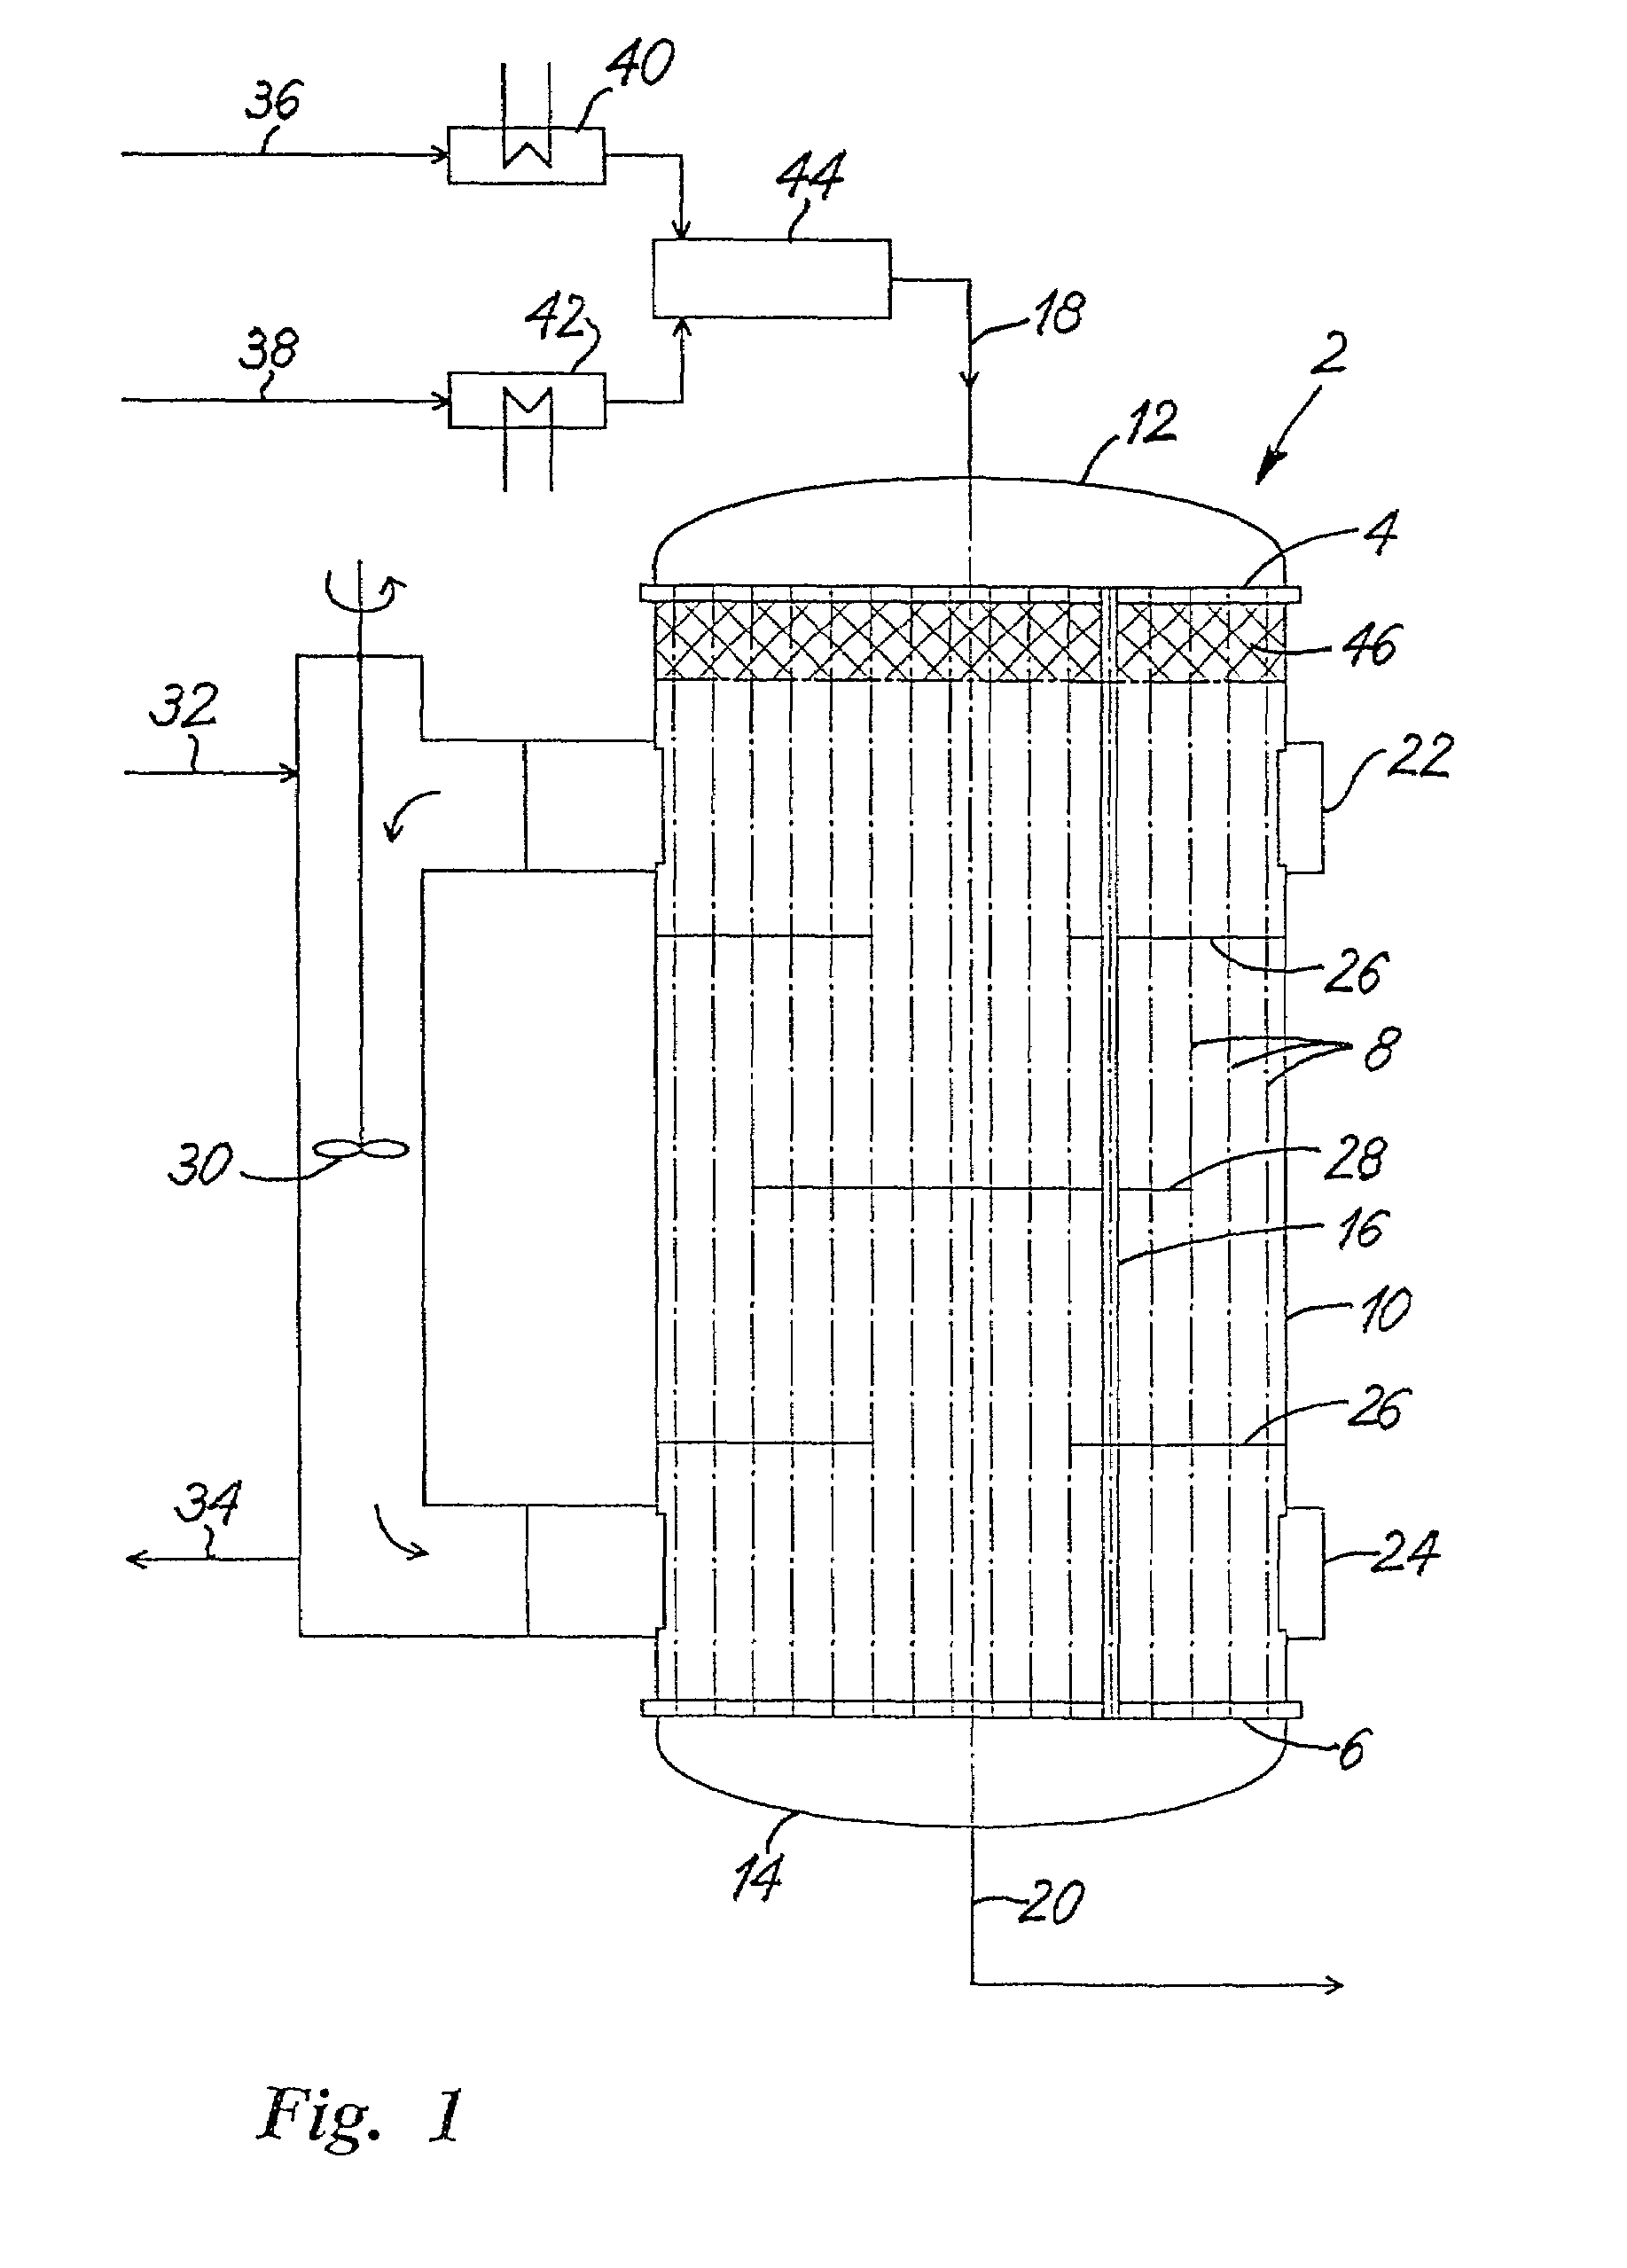 Tubular reactor for catalytic gas phase reactions